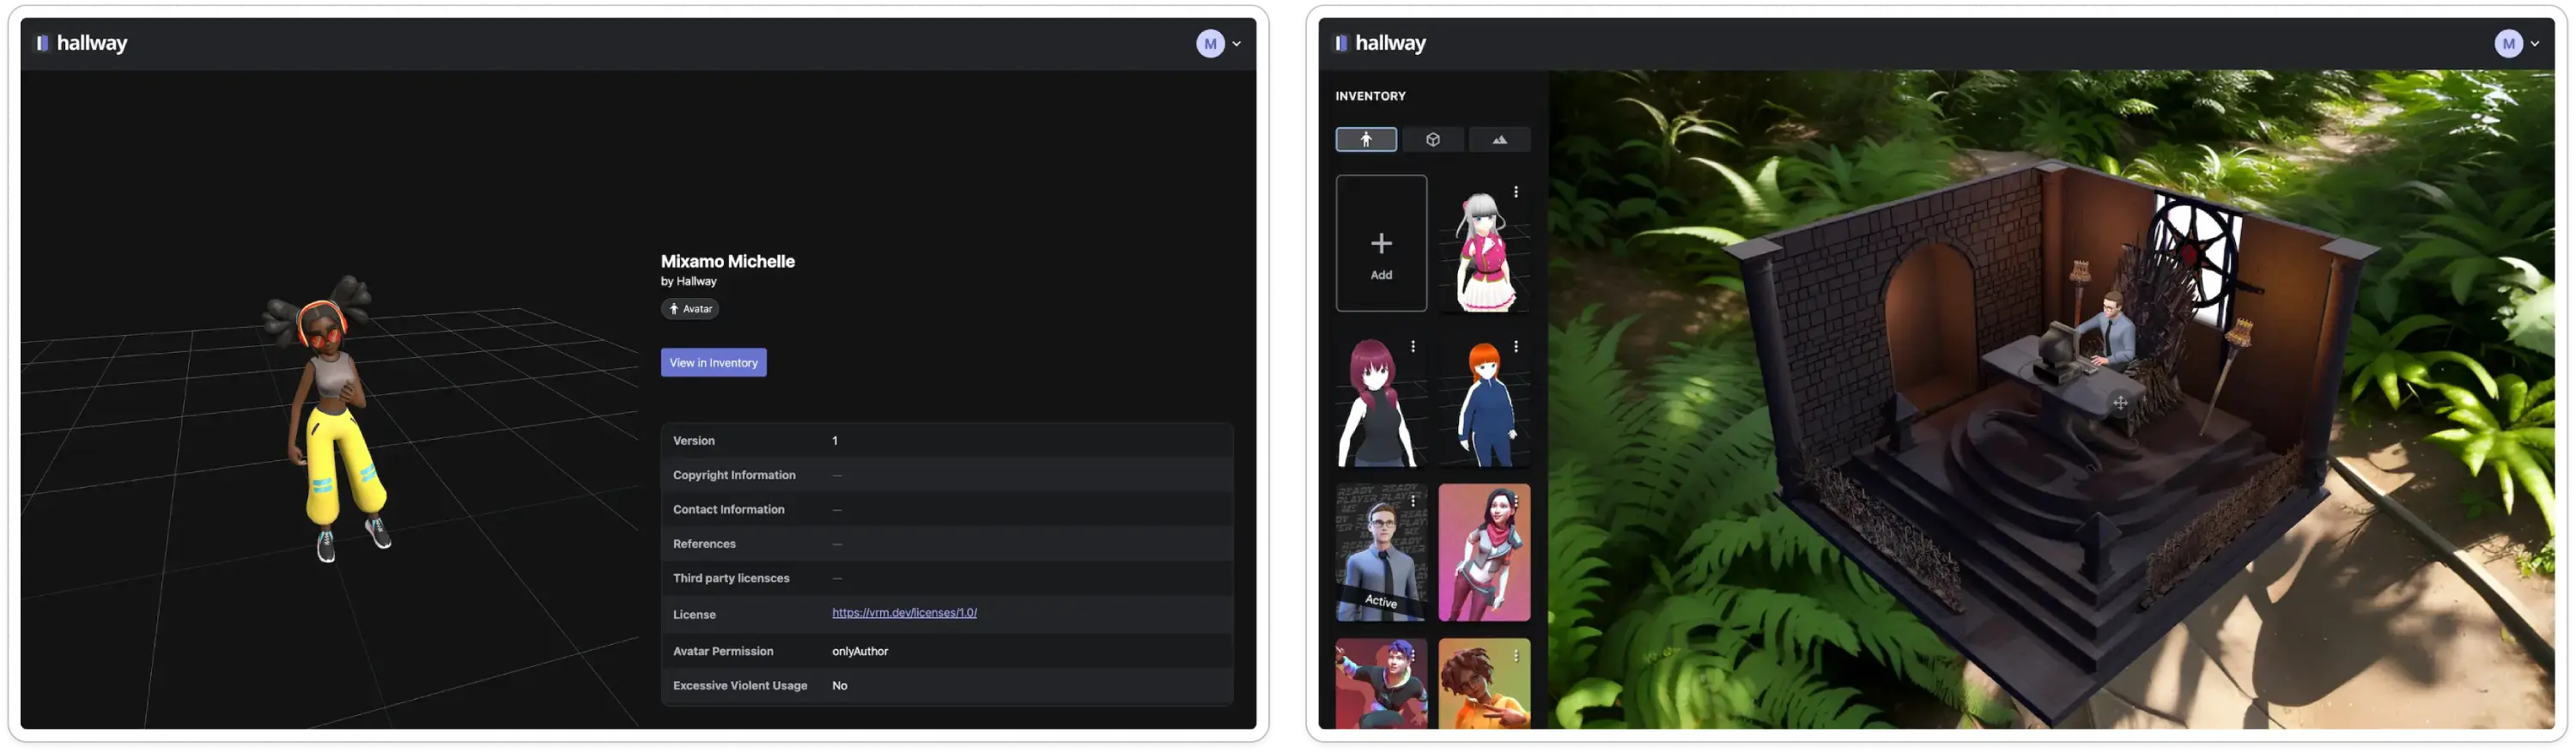 Left: Marketplace preview page. Right: 3D profile page.